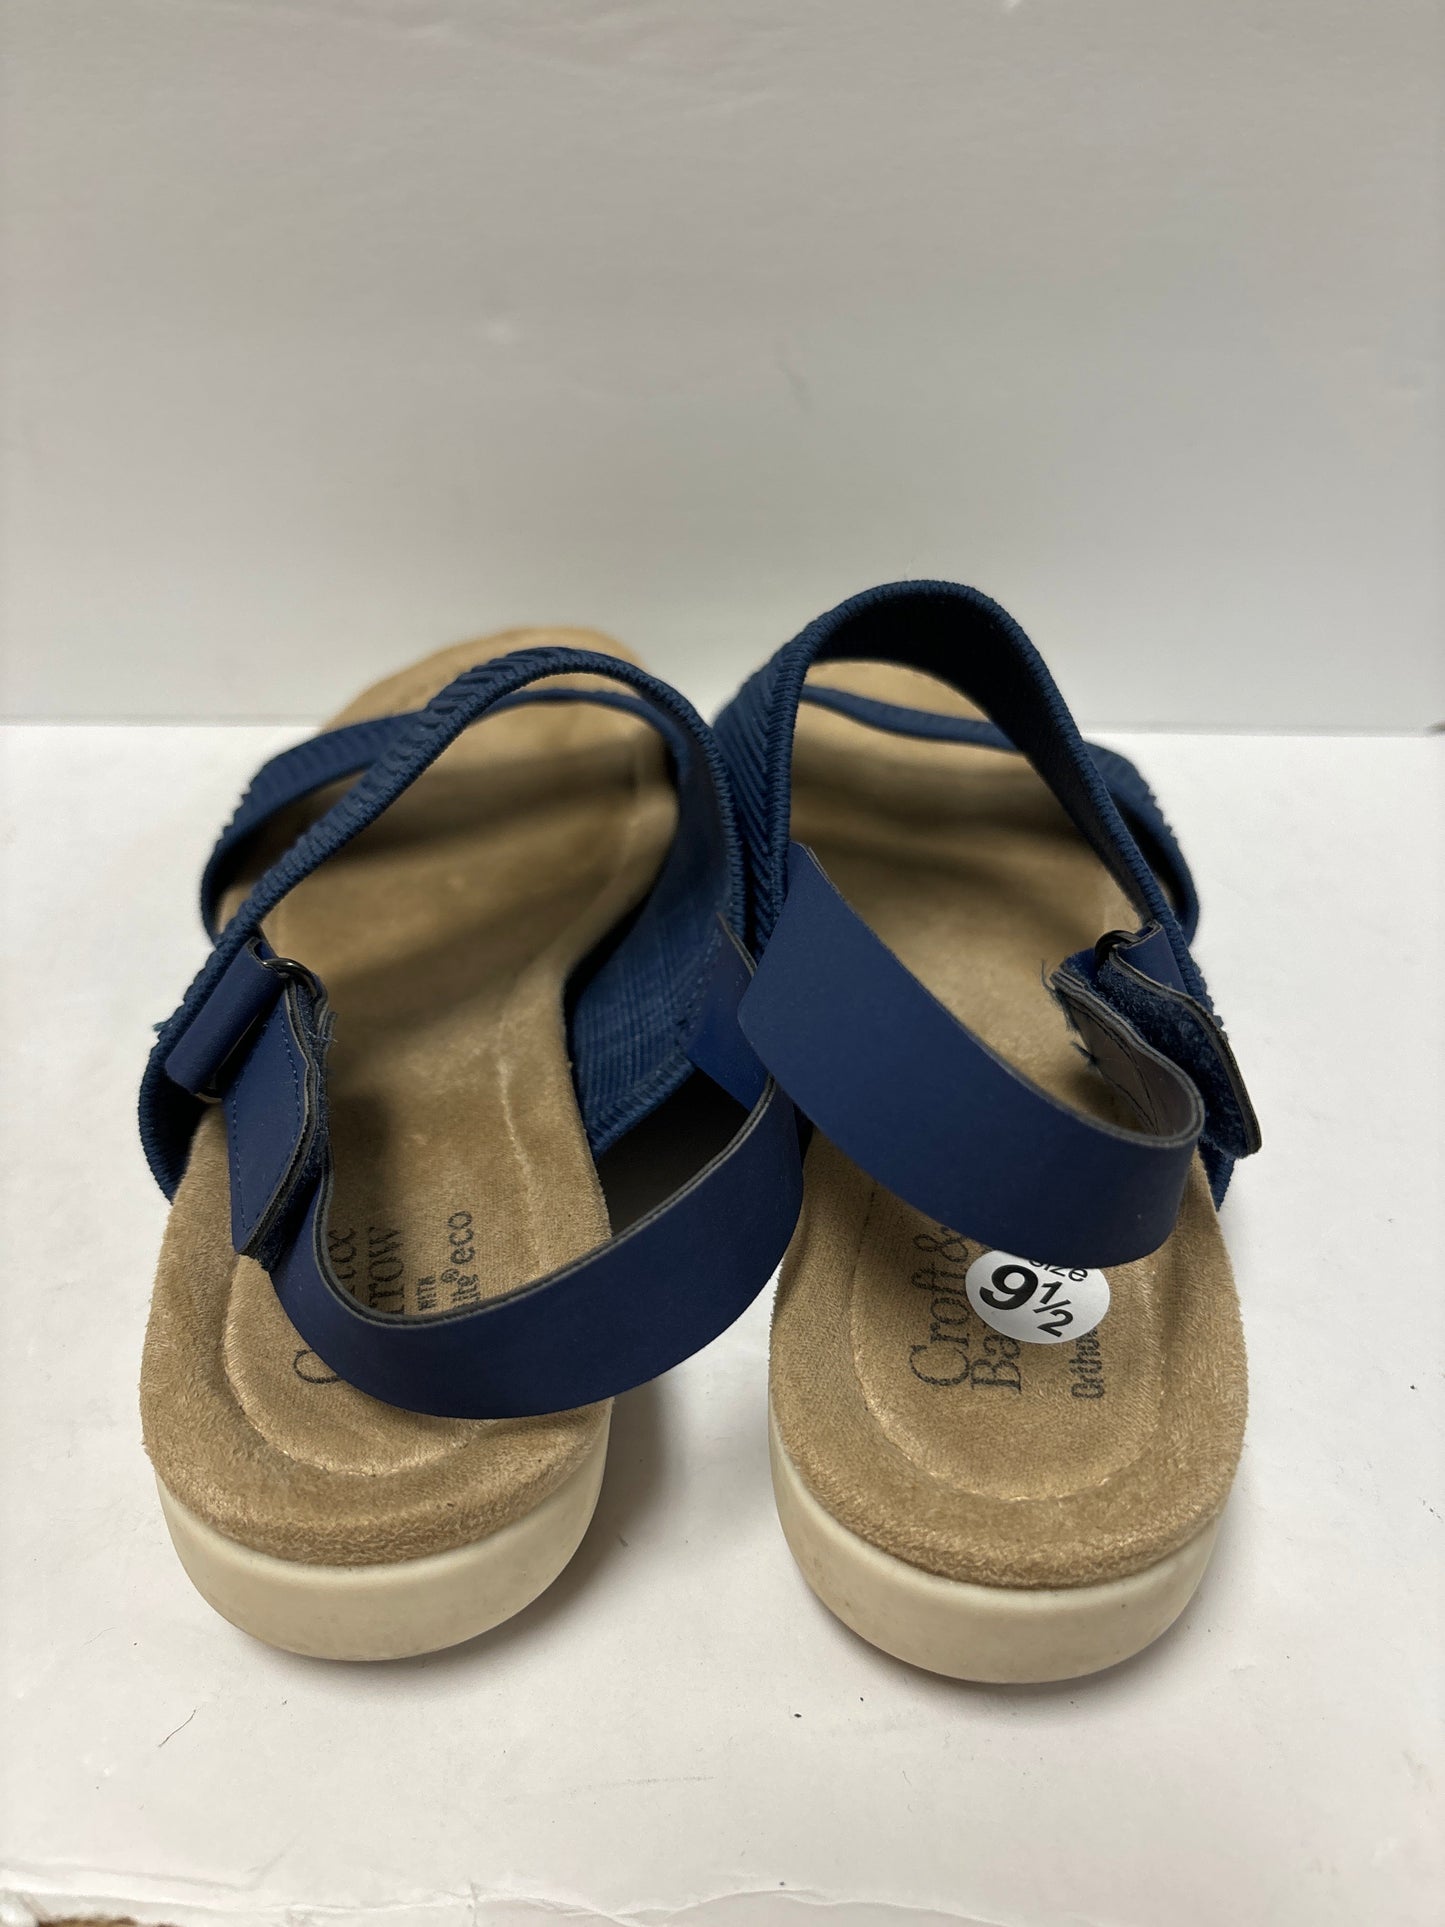 Navy Sandals Flats Croft And Barrow, Size 9.5